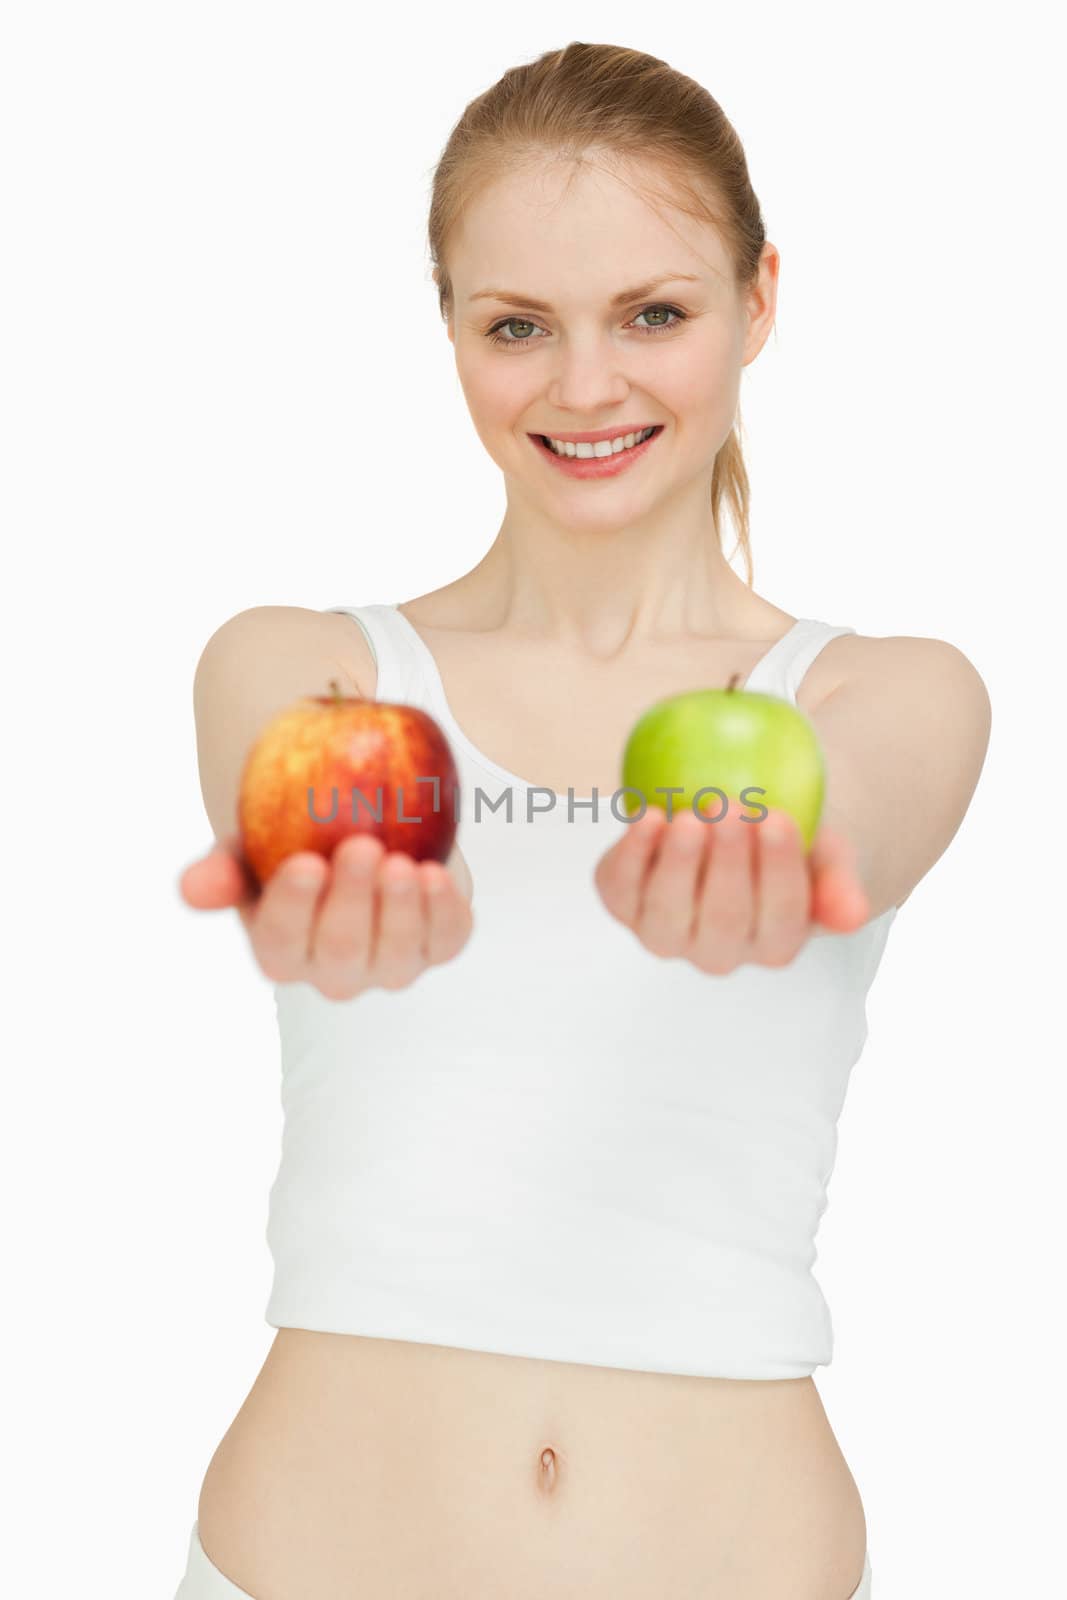 Joyful woman presenting two apples against white background